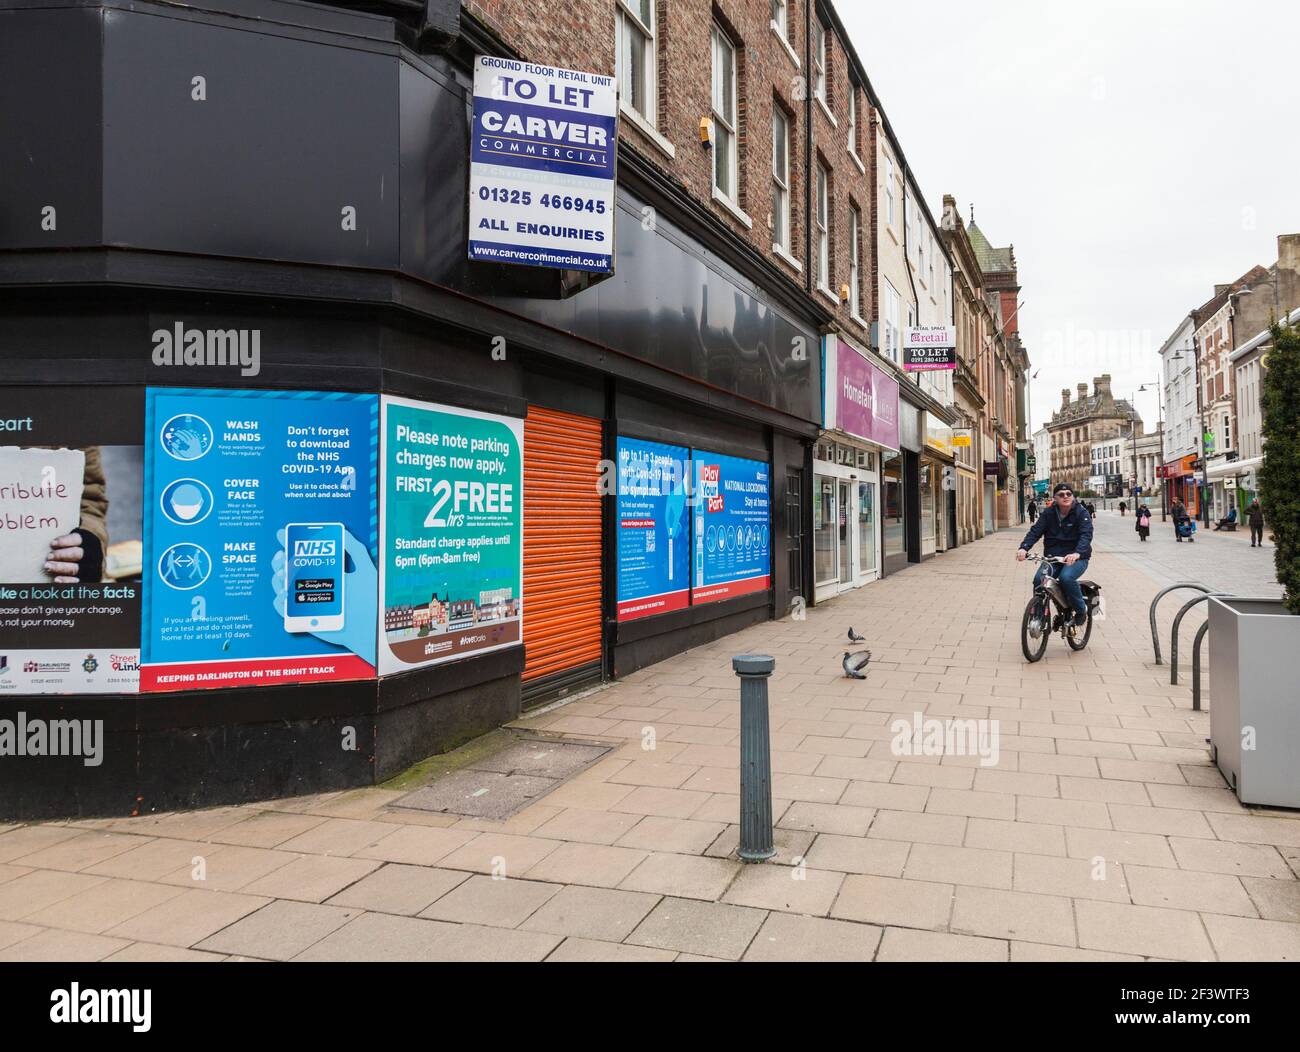 A street scene in the town centre of Darlington,England,UK showing empty shops with' To Let 'signs Stock Photo